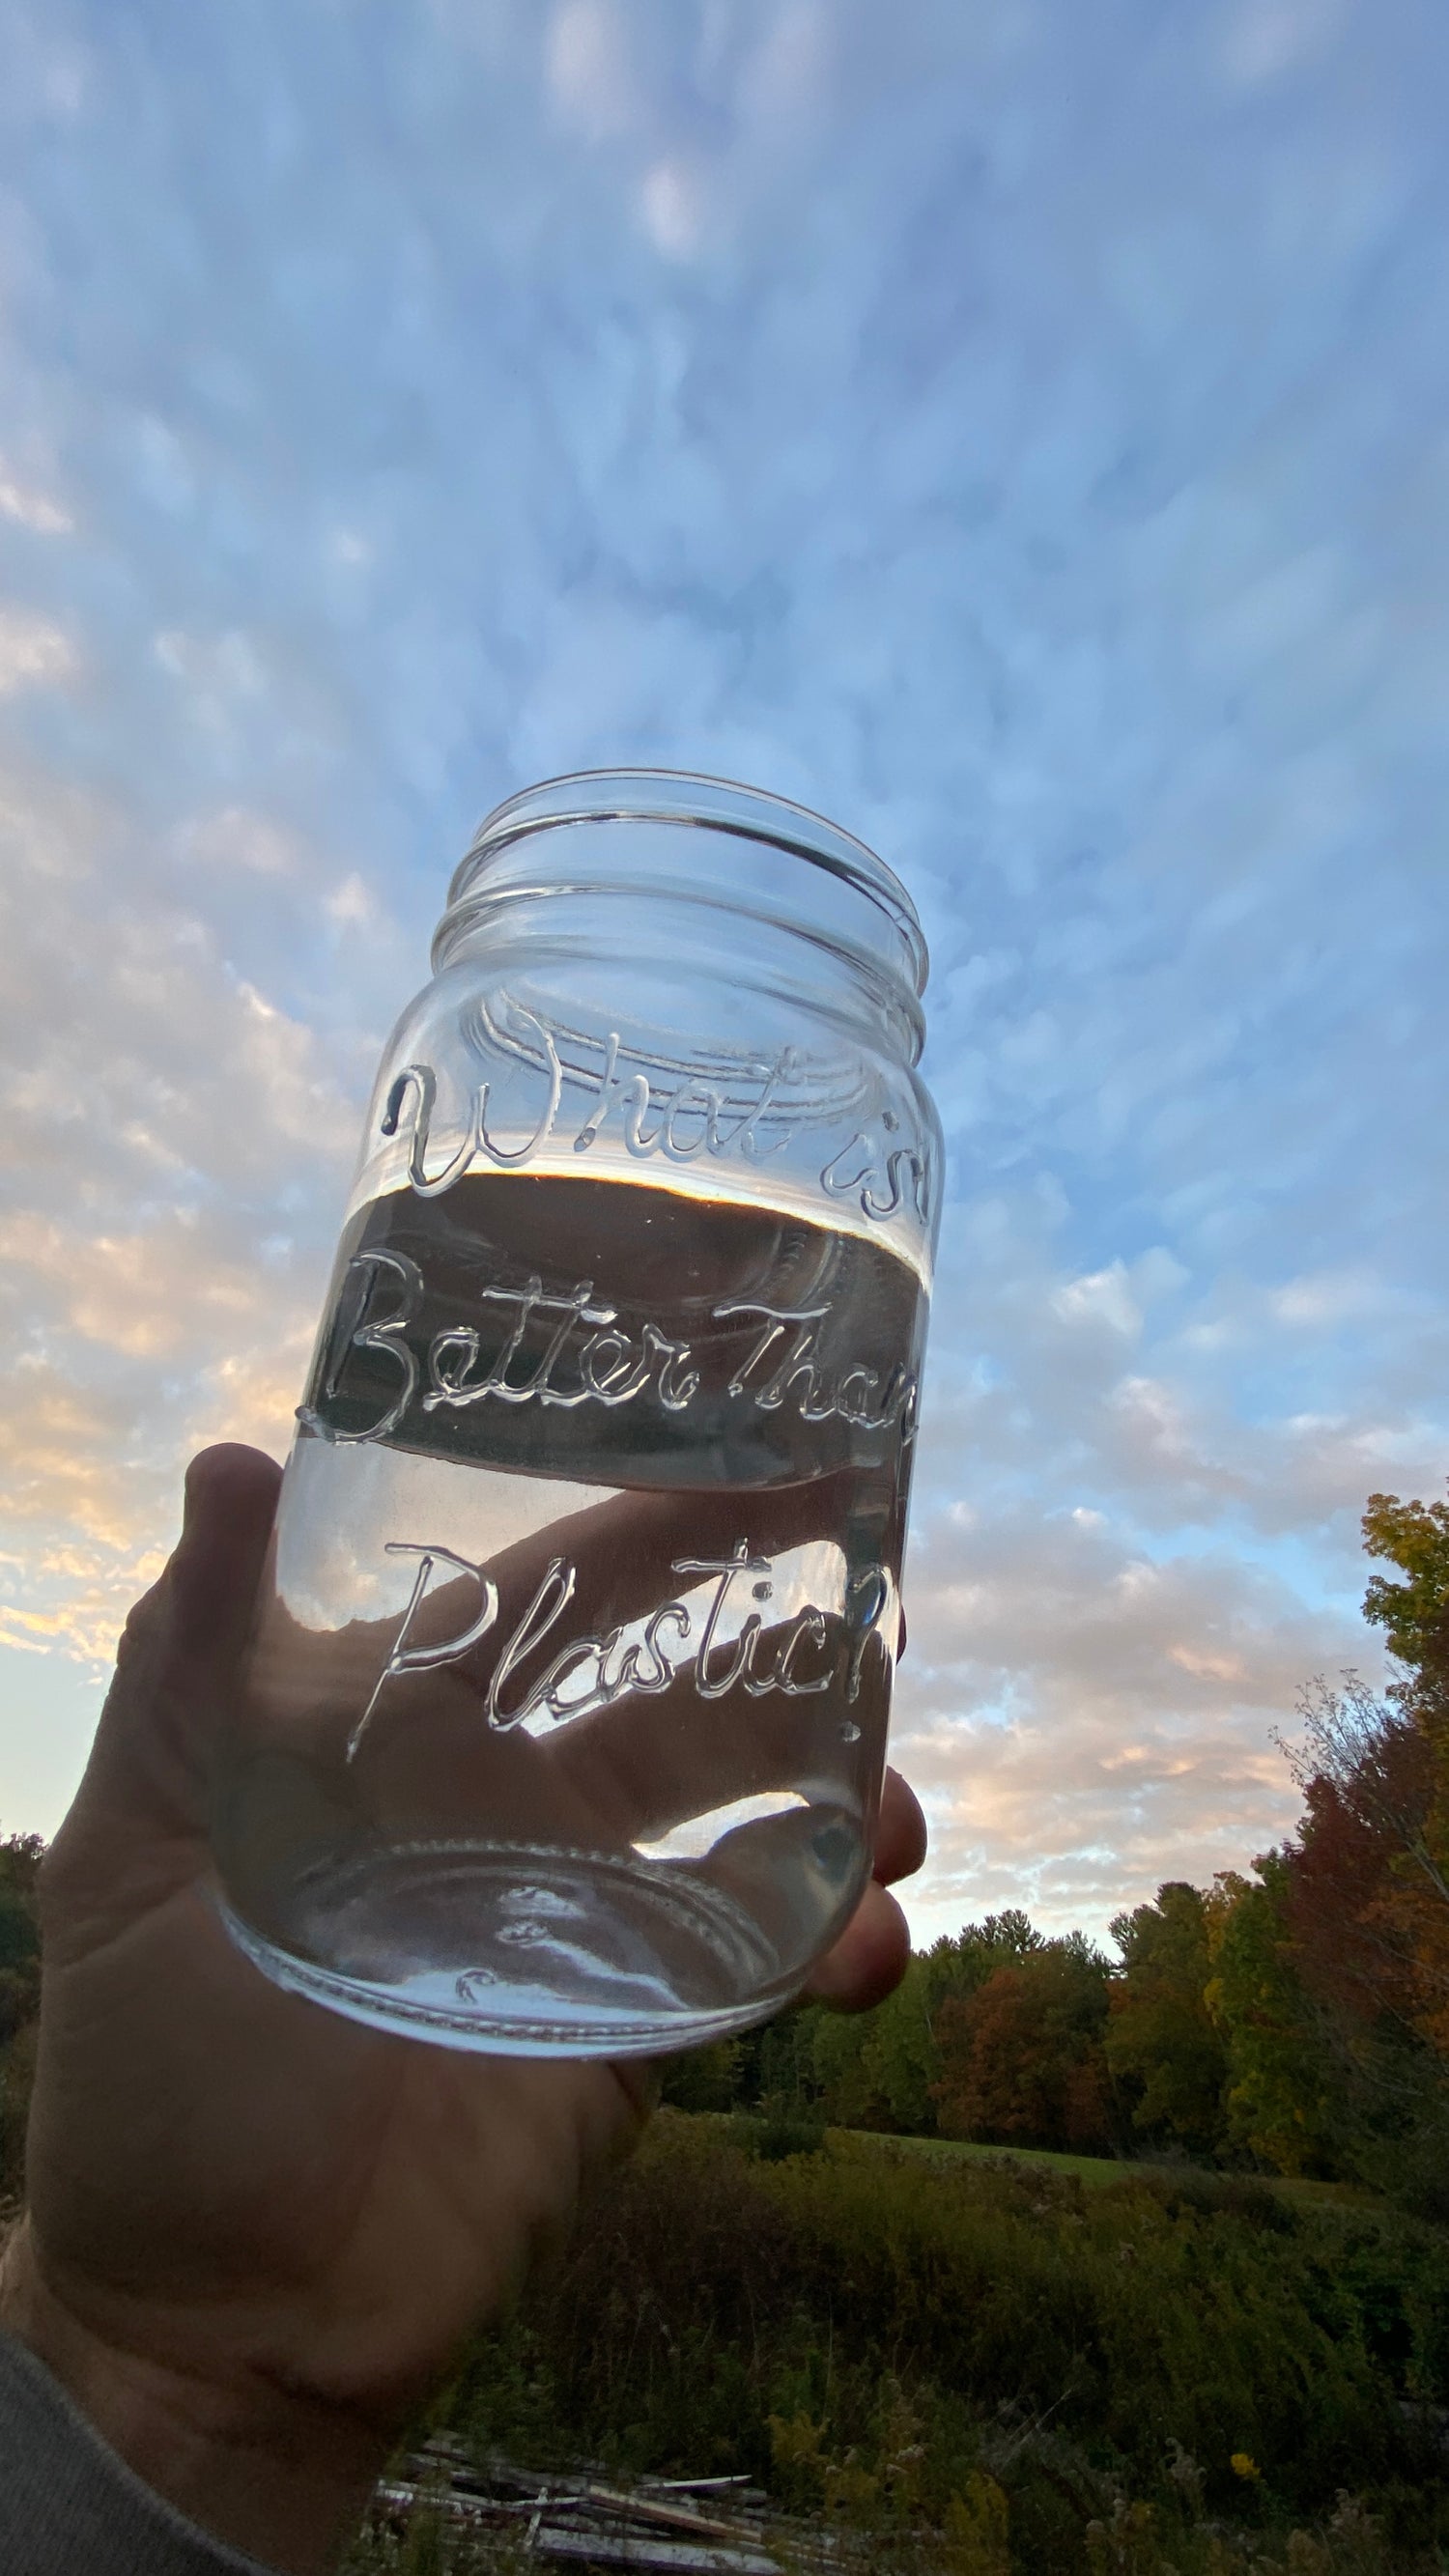 Sunset sky background, with a hand holding up an embossed glass storage mason jar with “What is Better Than Plastic?” Brand Logo